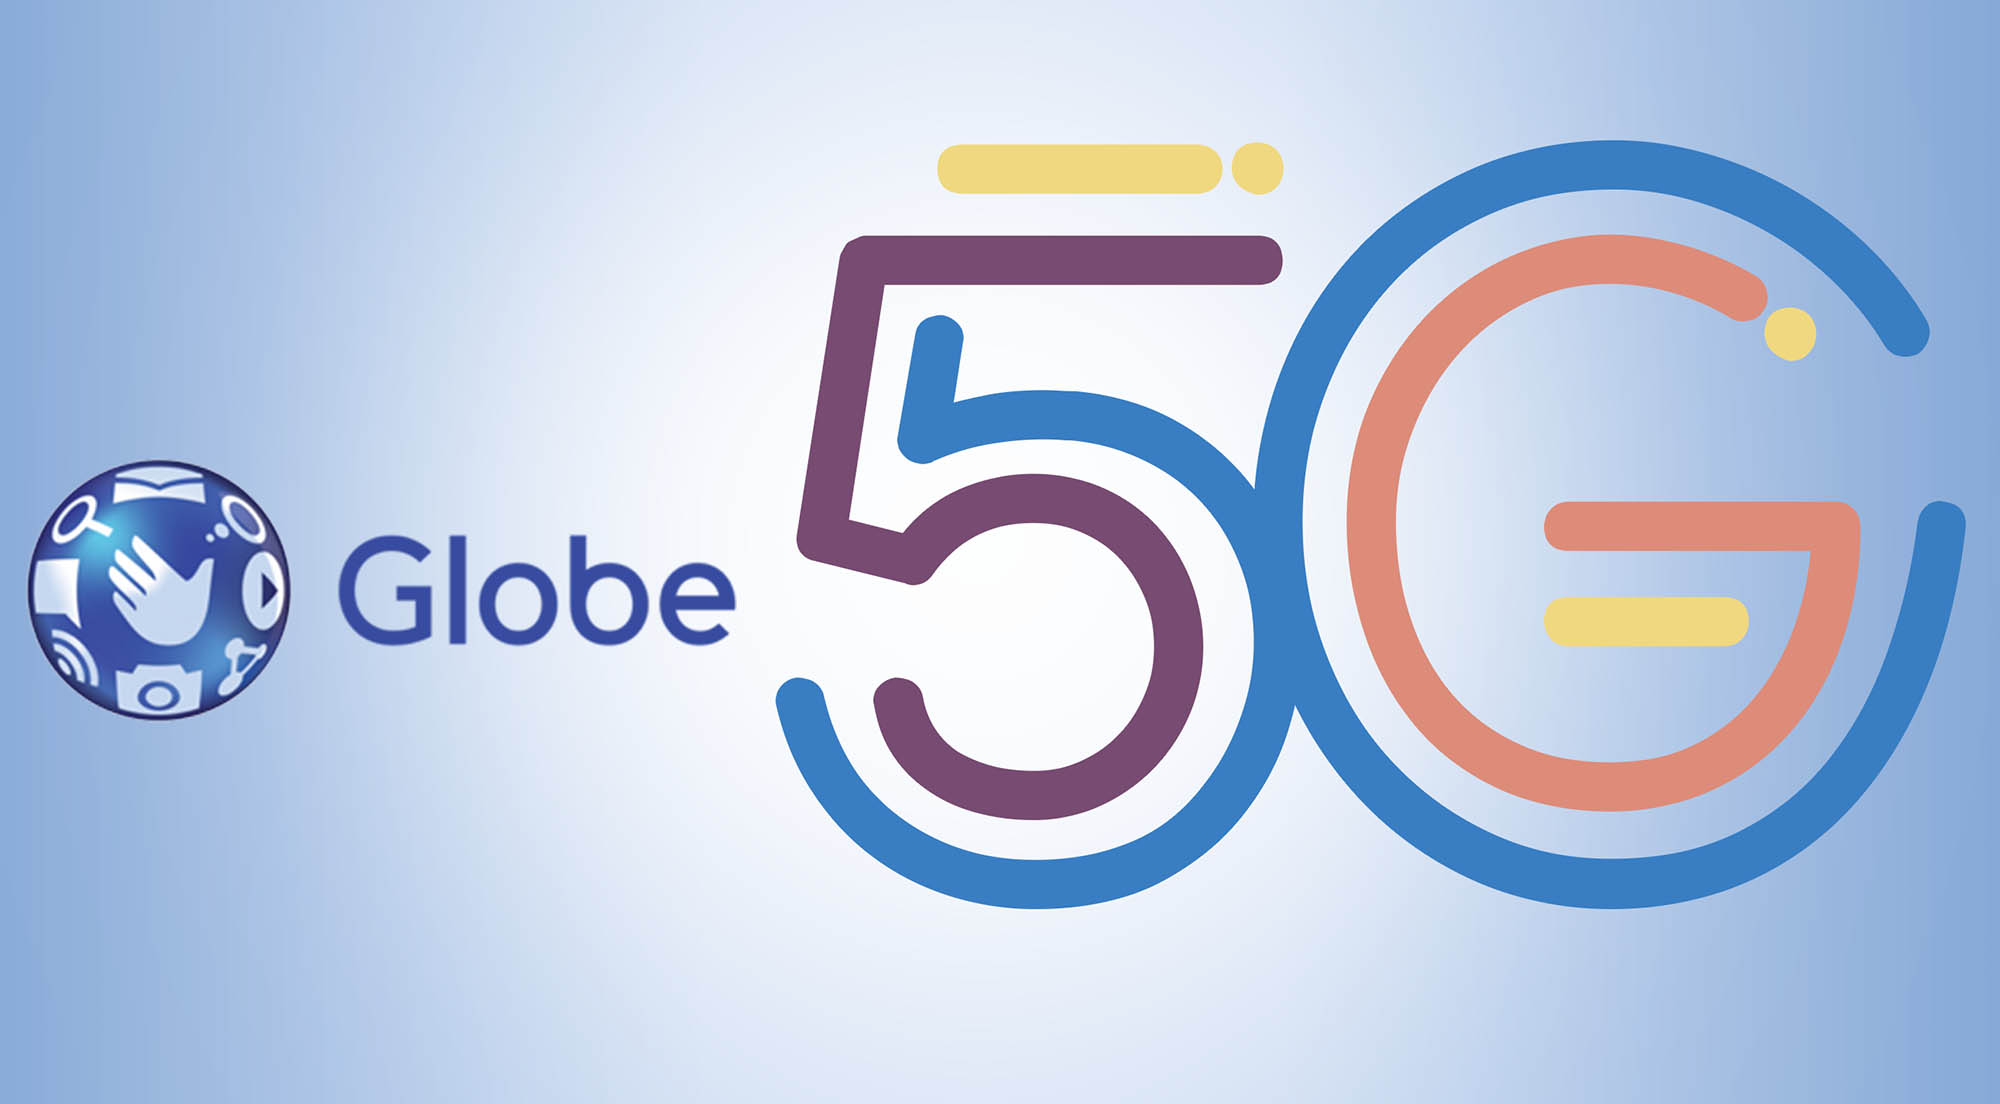 Globe expands 5G Roaming services to more countries in Asia, Middle East